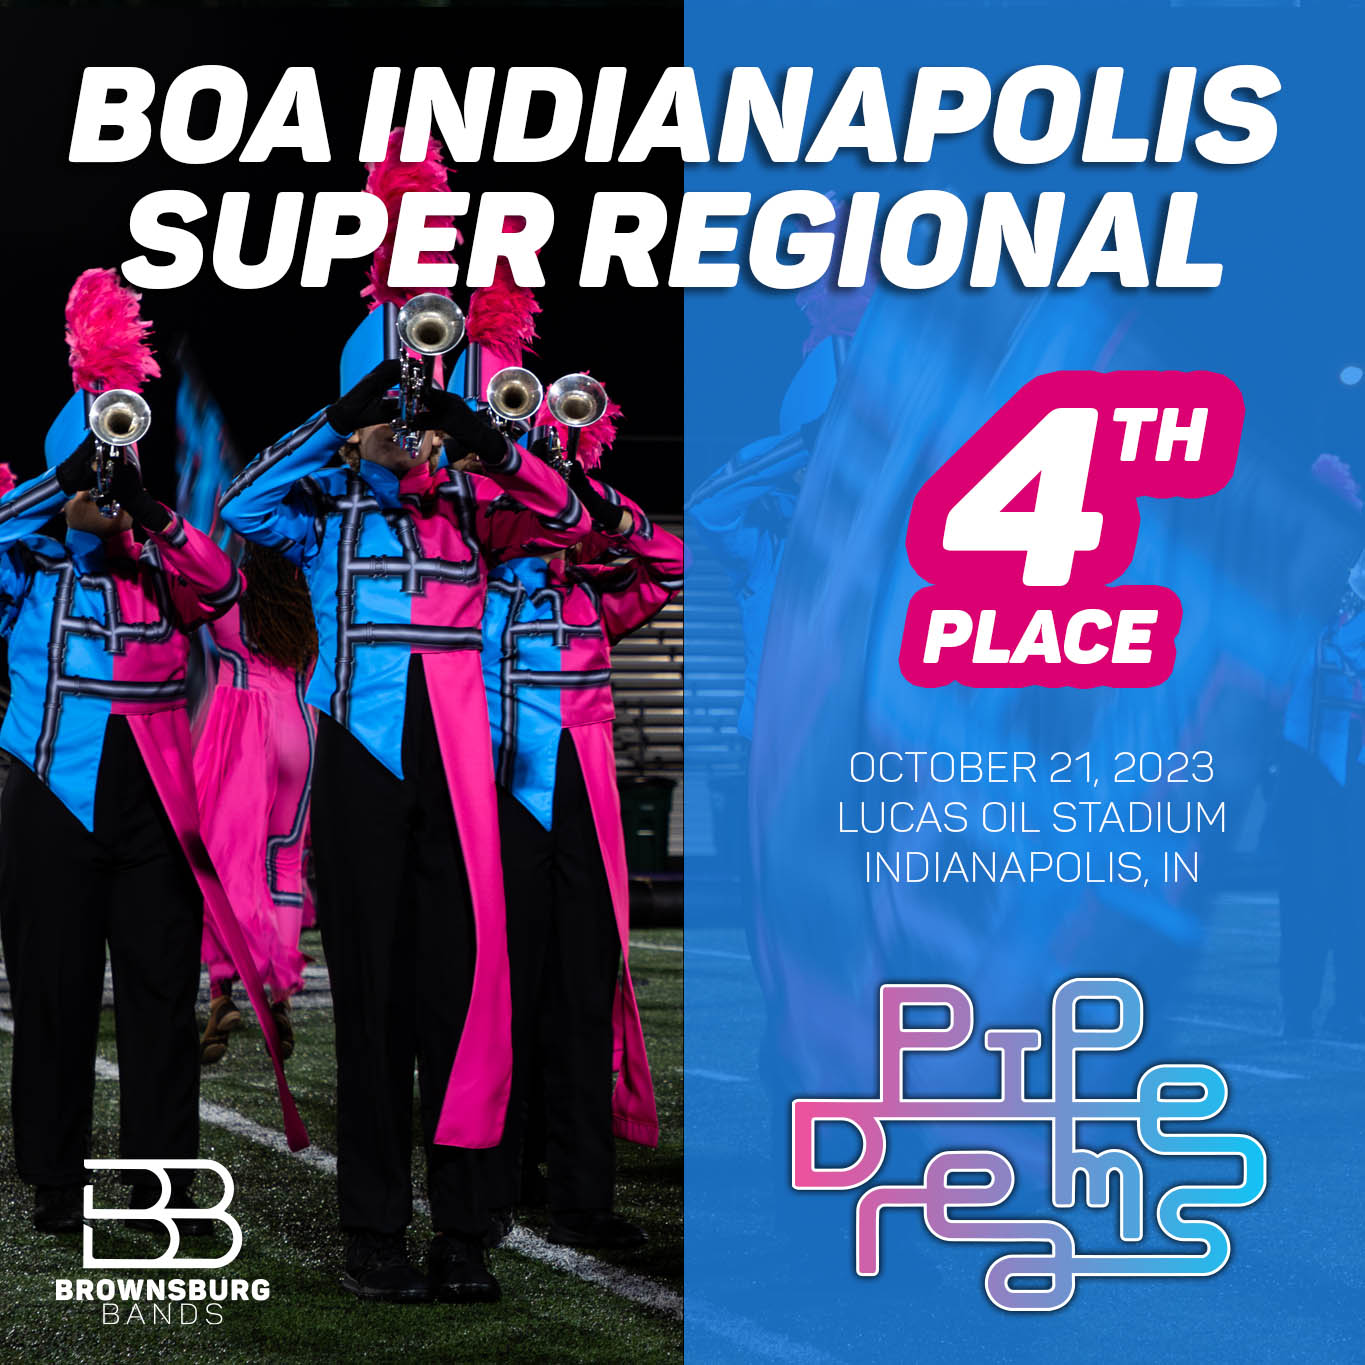 Sound of Brownsburg takes 4th place at BOA Indy Super Regional